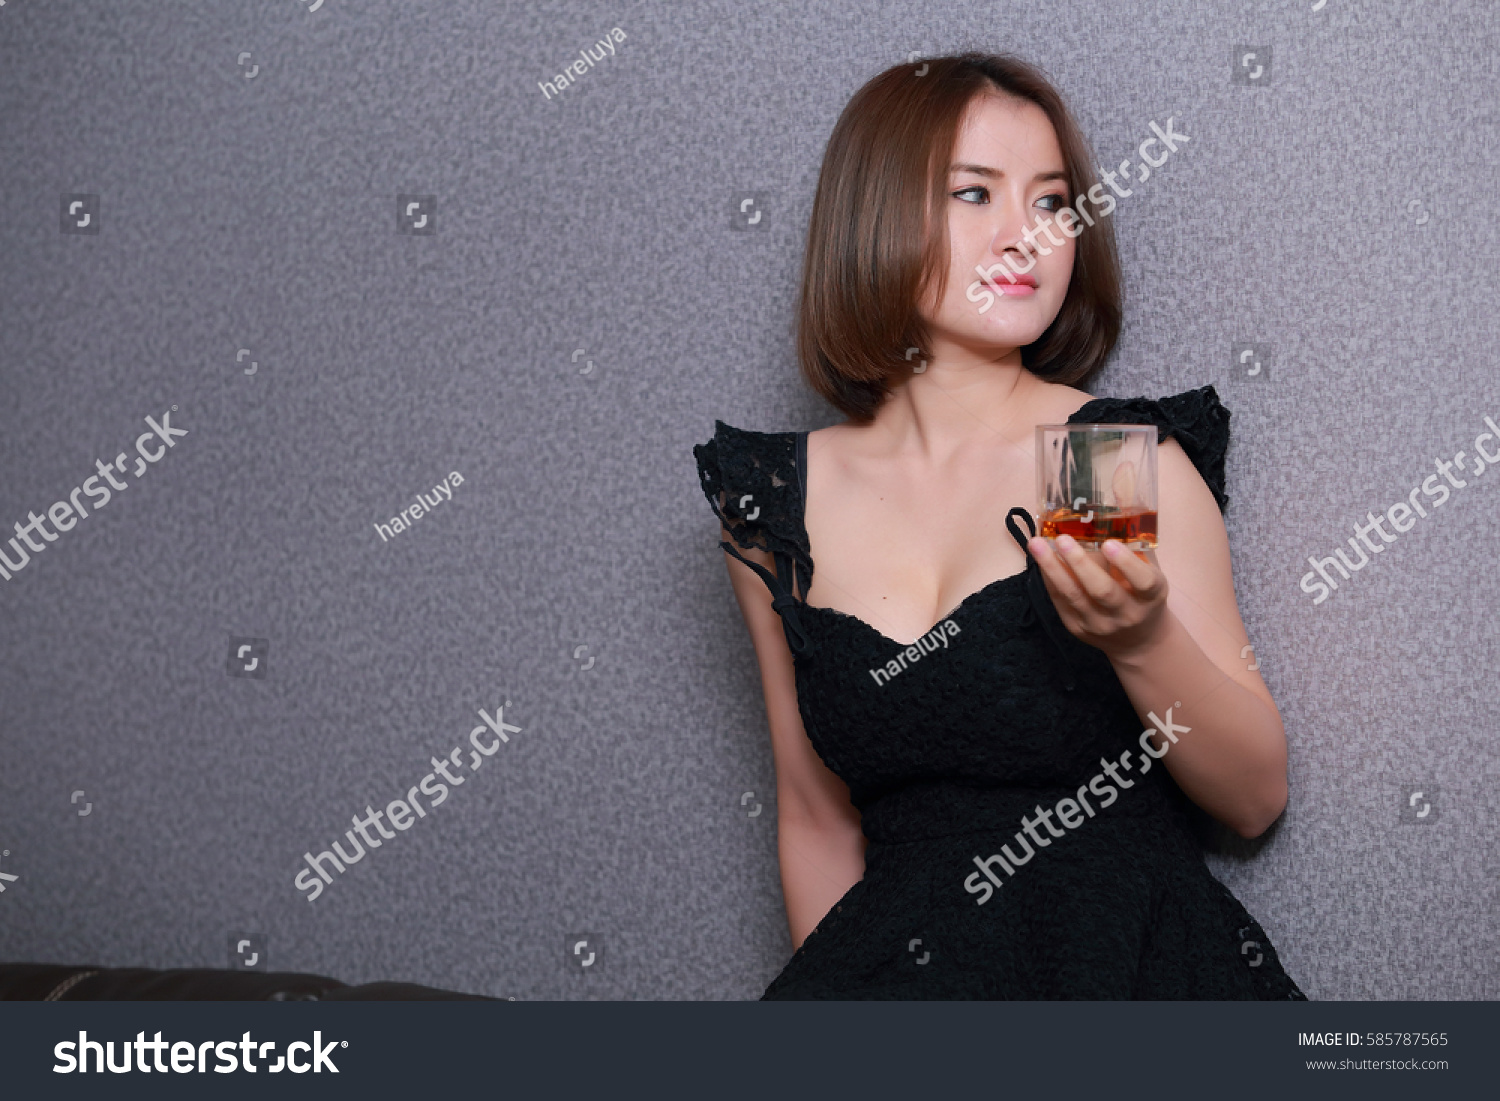 Asian woman with short hair, beautiful skin.Holding a glass of brandy only one.International Women's Day 2017. #585787565